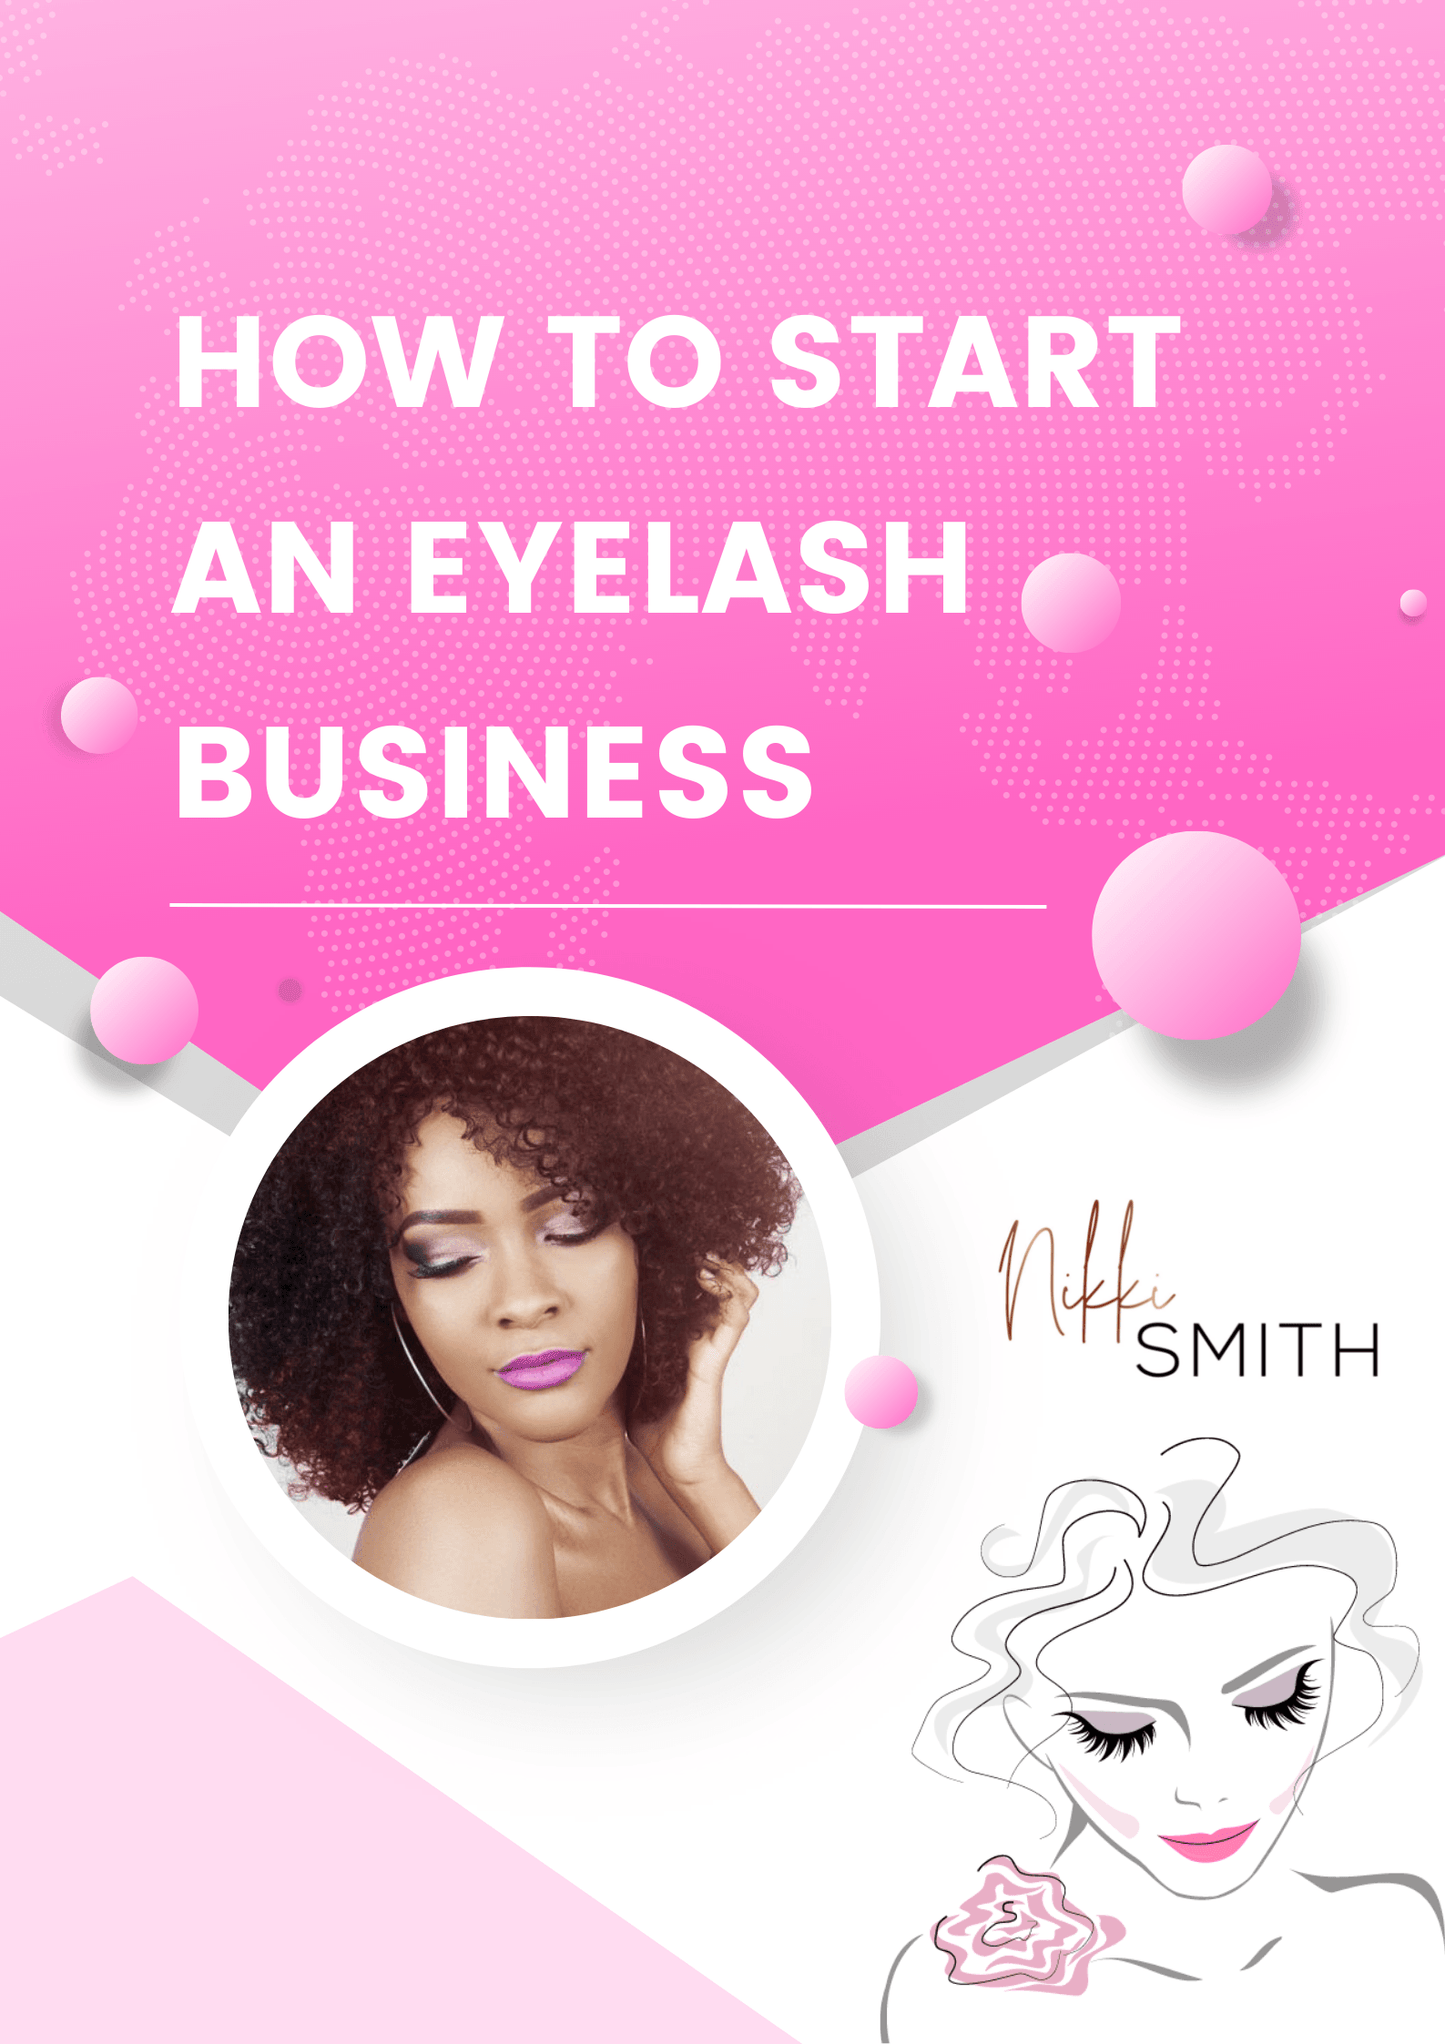 Tips On How To Start A Eyelash Business - Nikki Smith Collection 